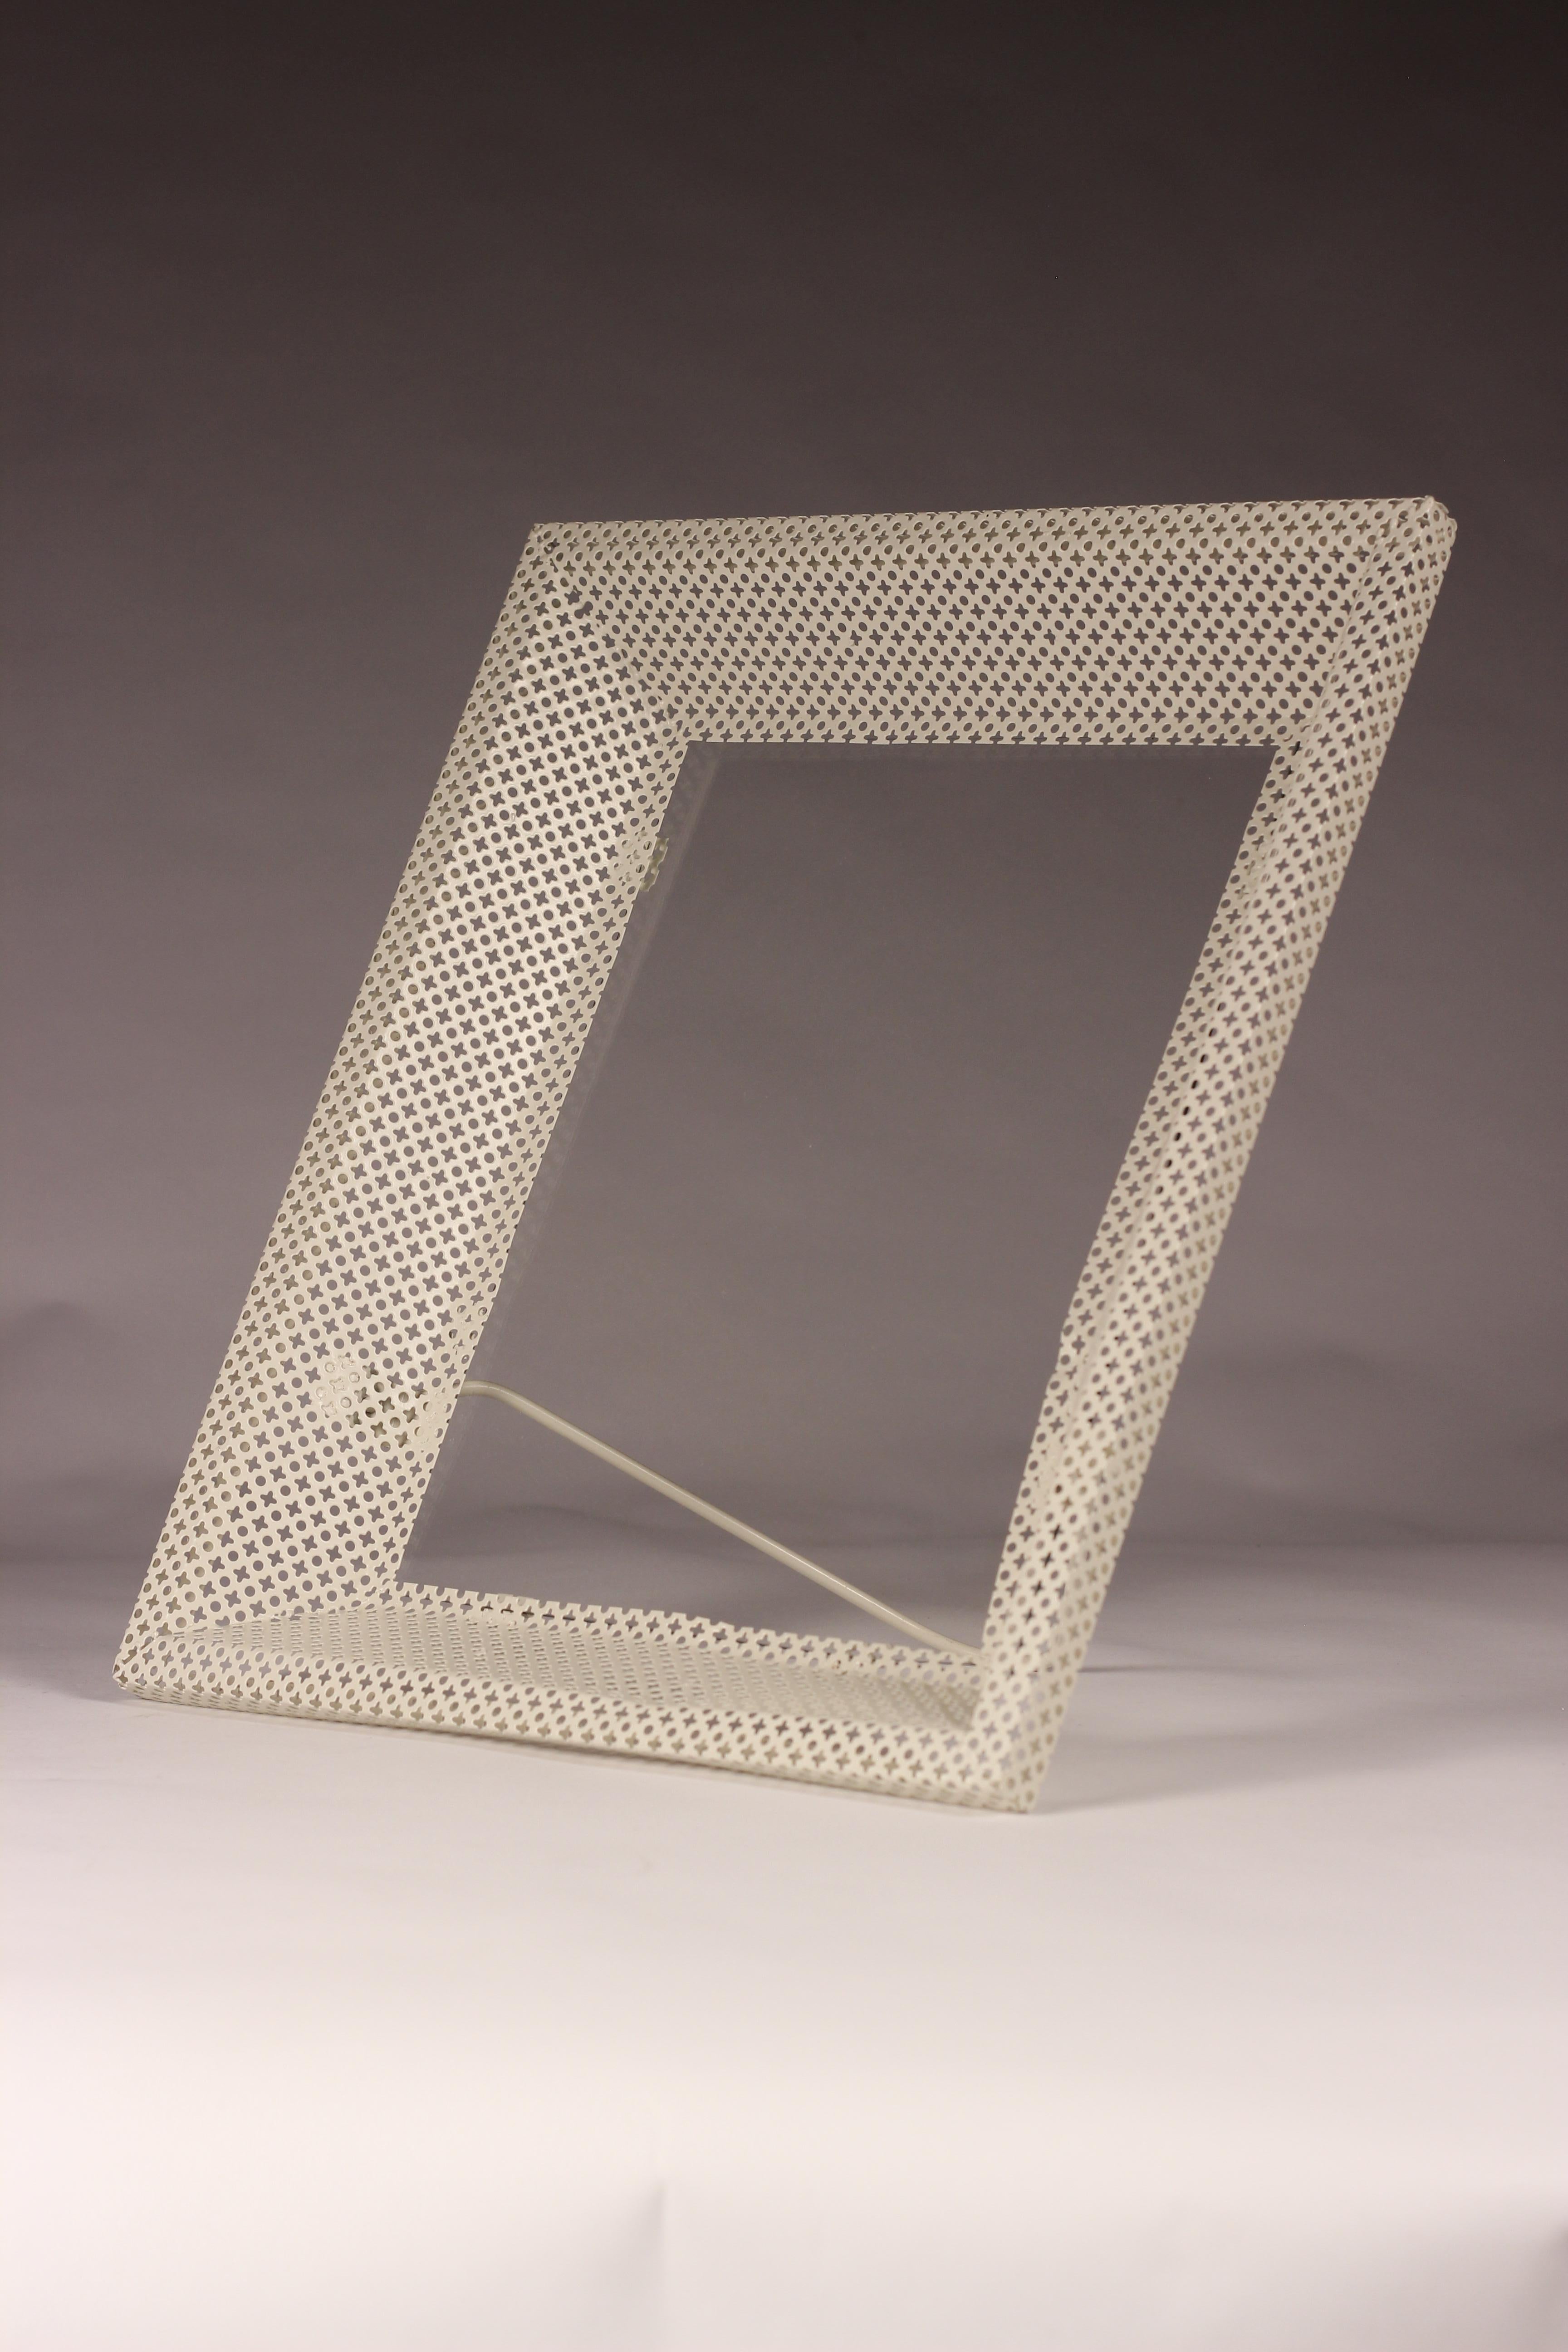 Pair of Mathieu Matégot White Perforated Metal Picture Frames/Mirrors 2